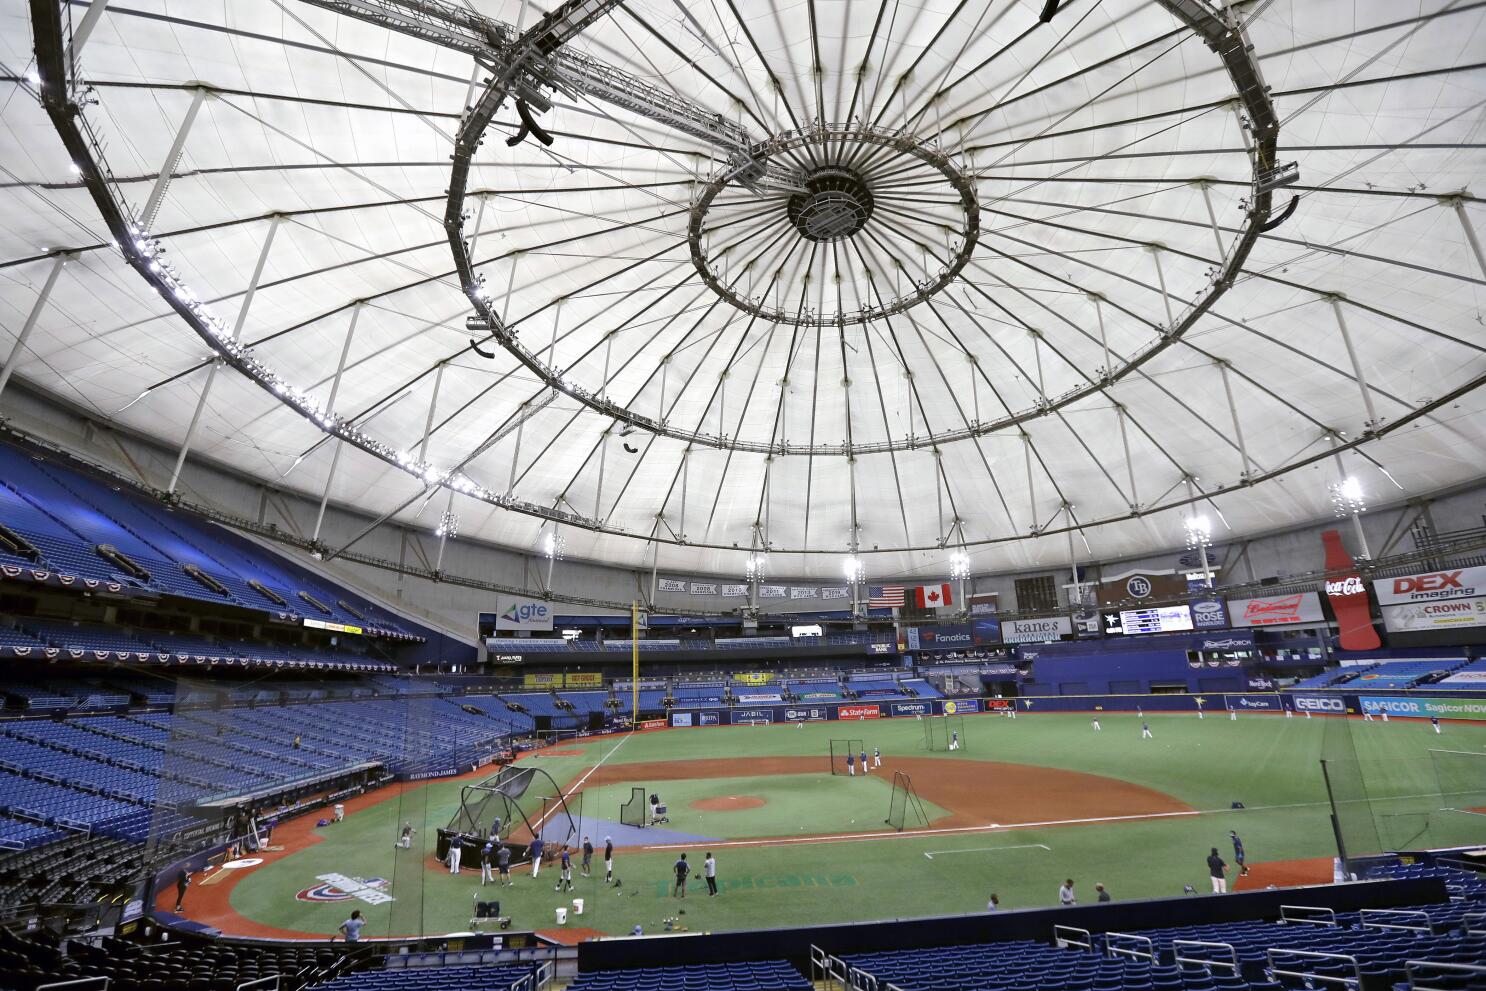 Rays promotion schedule has different look, and sound